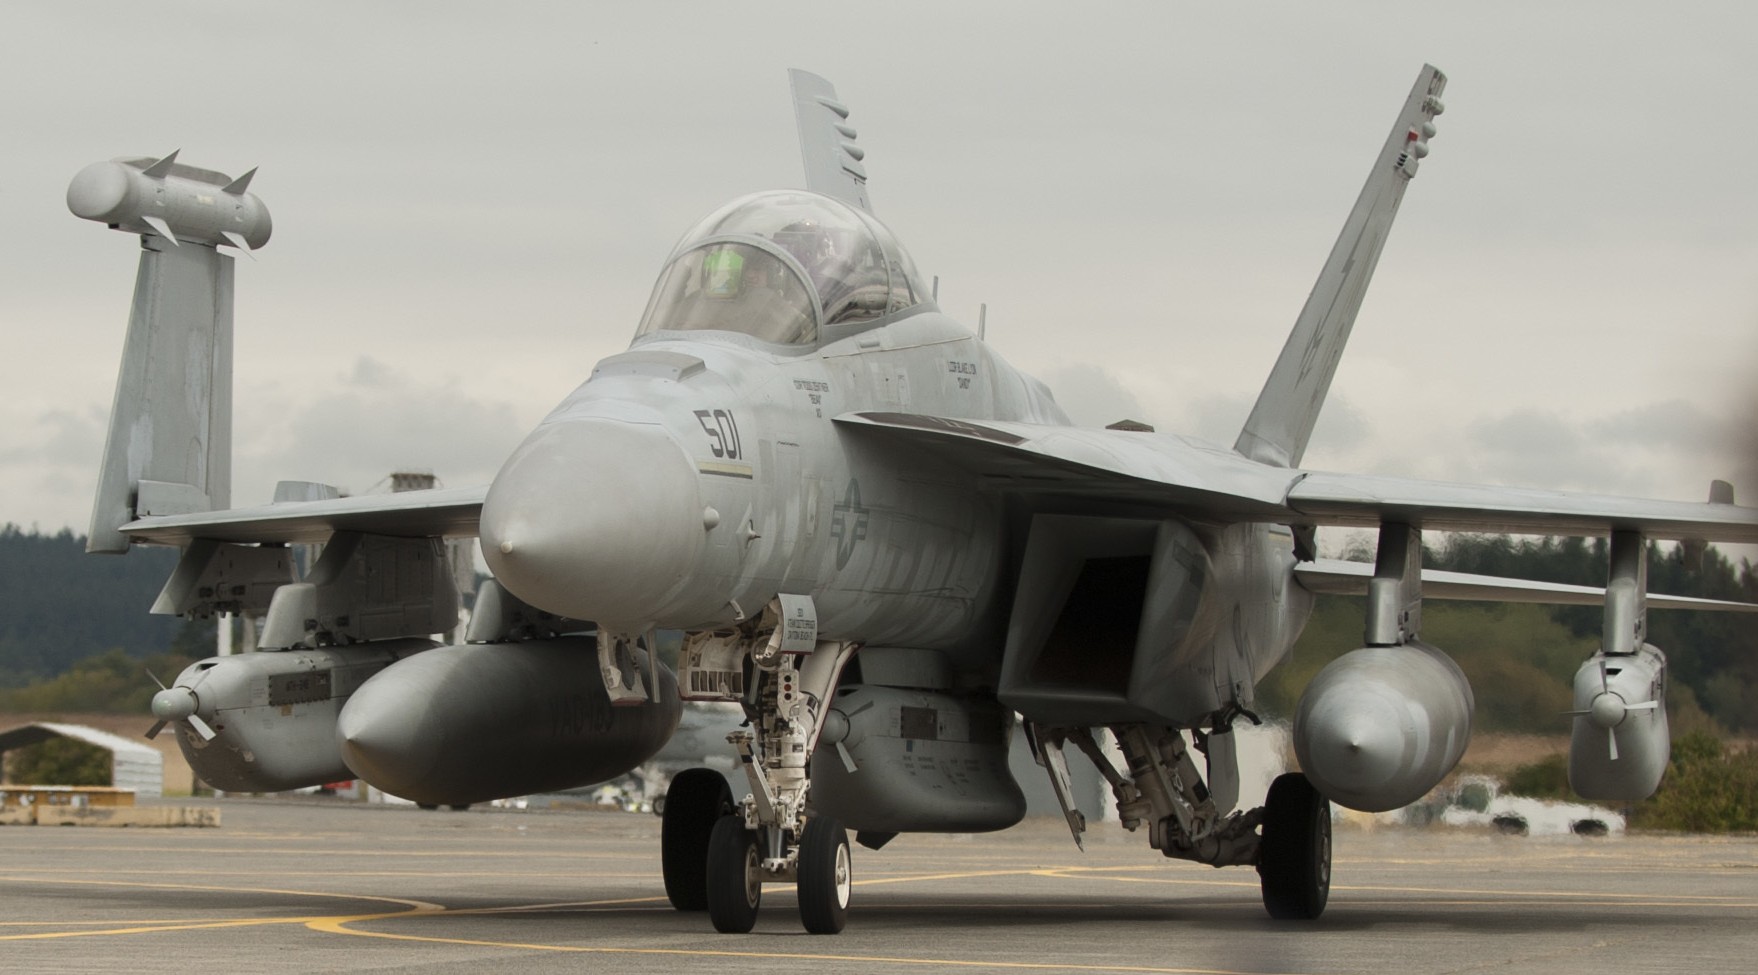 vaq-133 wizards electronic attack squadron vaqron us navy boeing ea-18g growler nas whidbey island 119